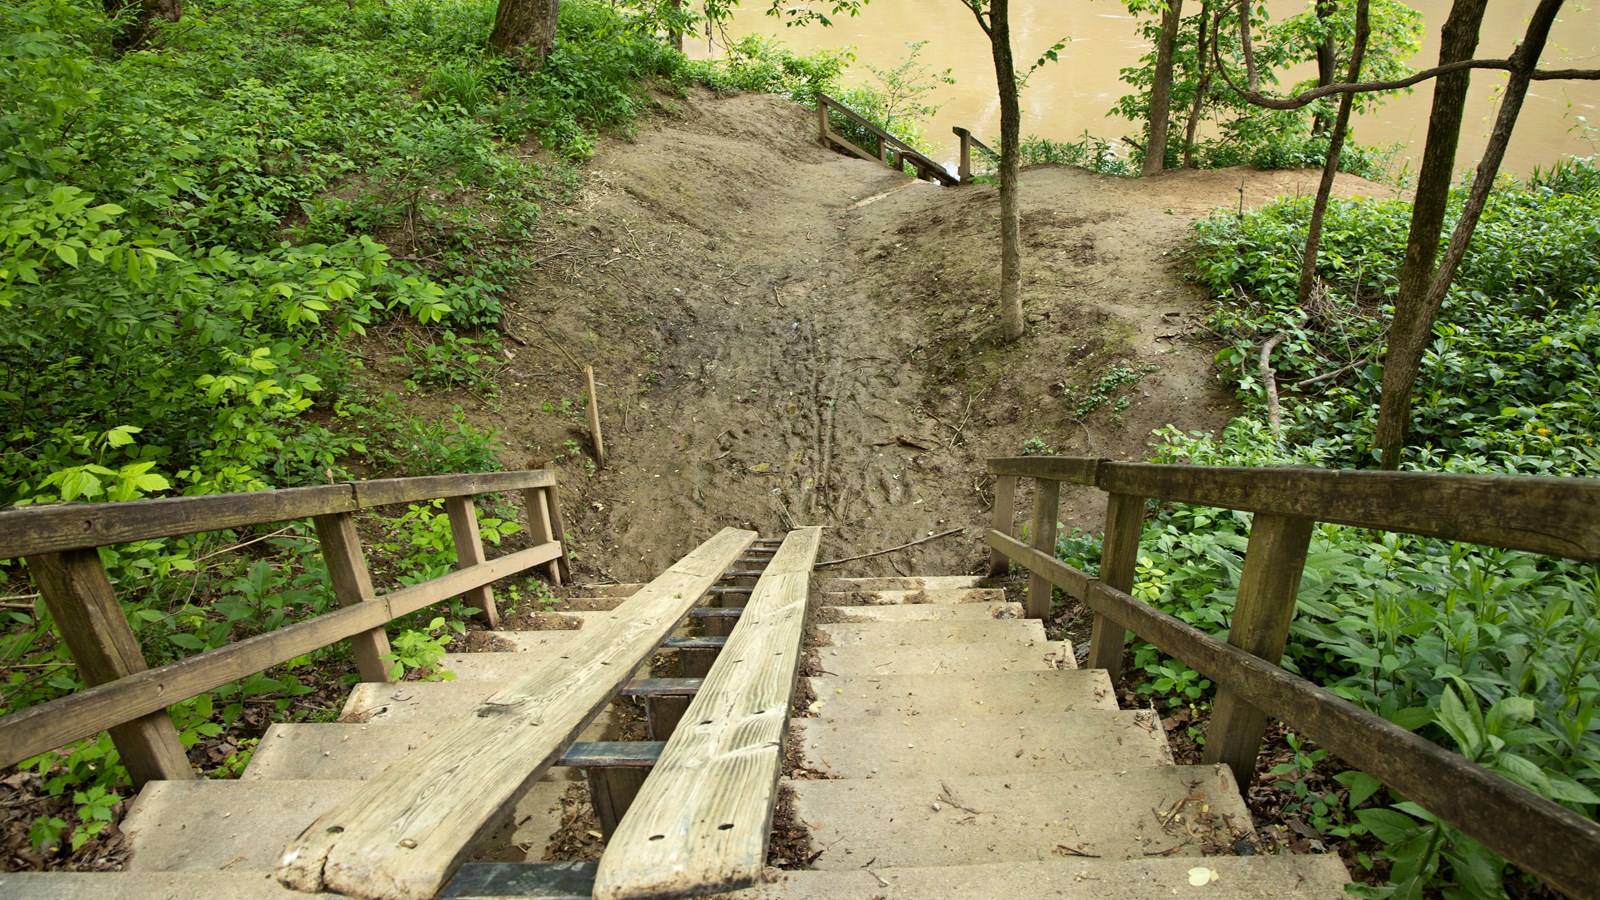 A wooden canoe and kayak ramp and concrete steps lead to the river.